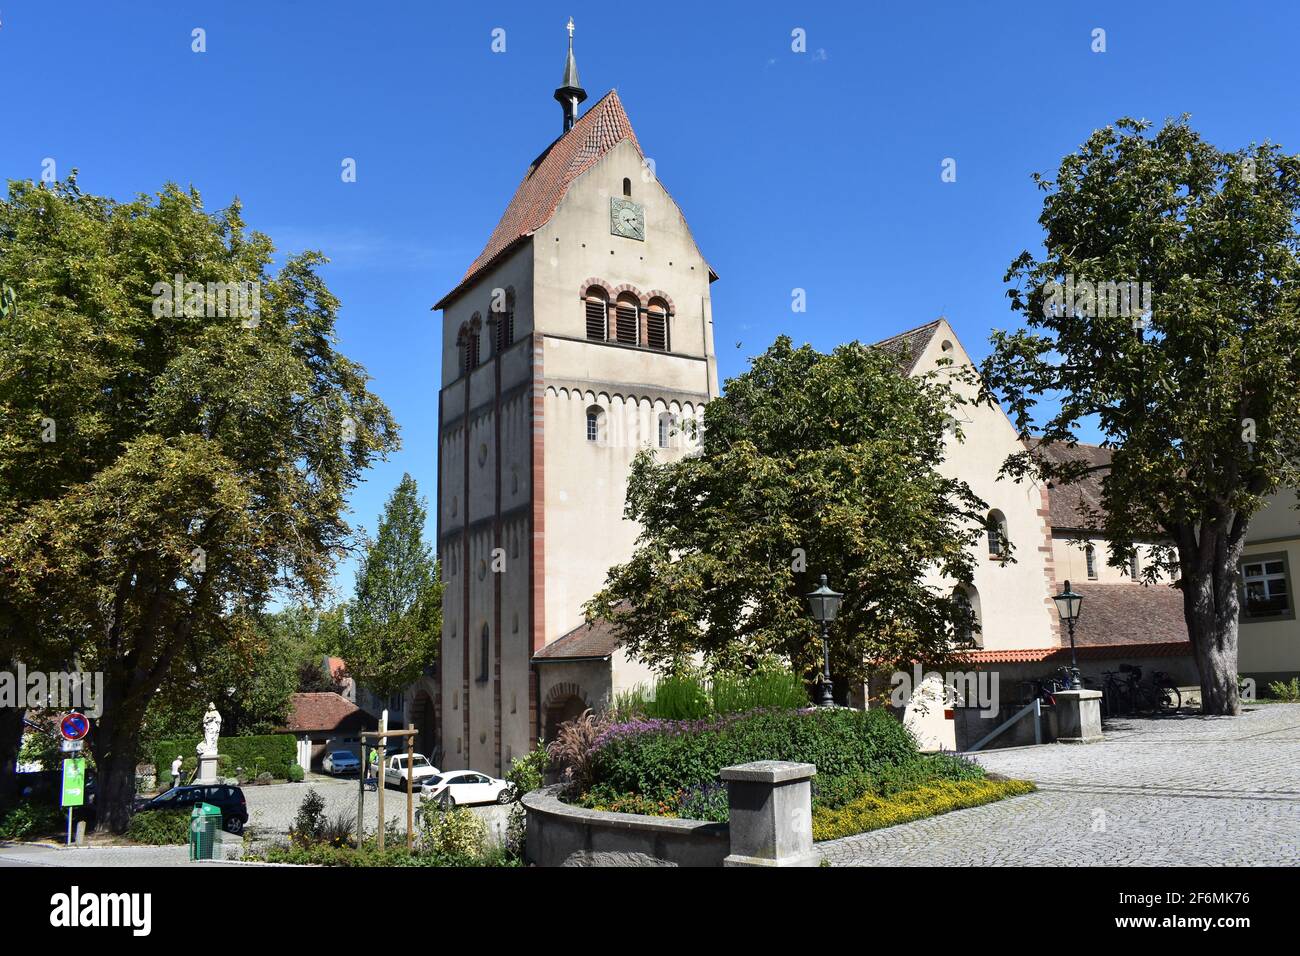 The Abbey Church of St Mary and Mark in Reichenau Mittelzel. Stock Photo